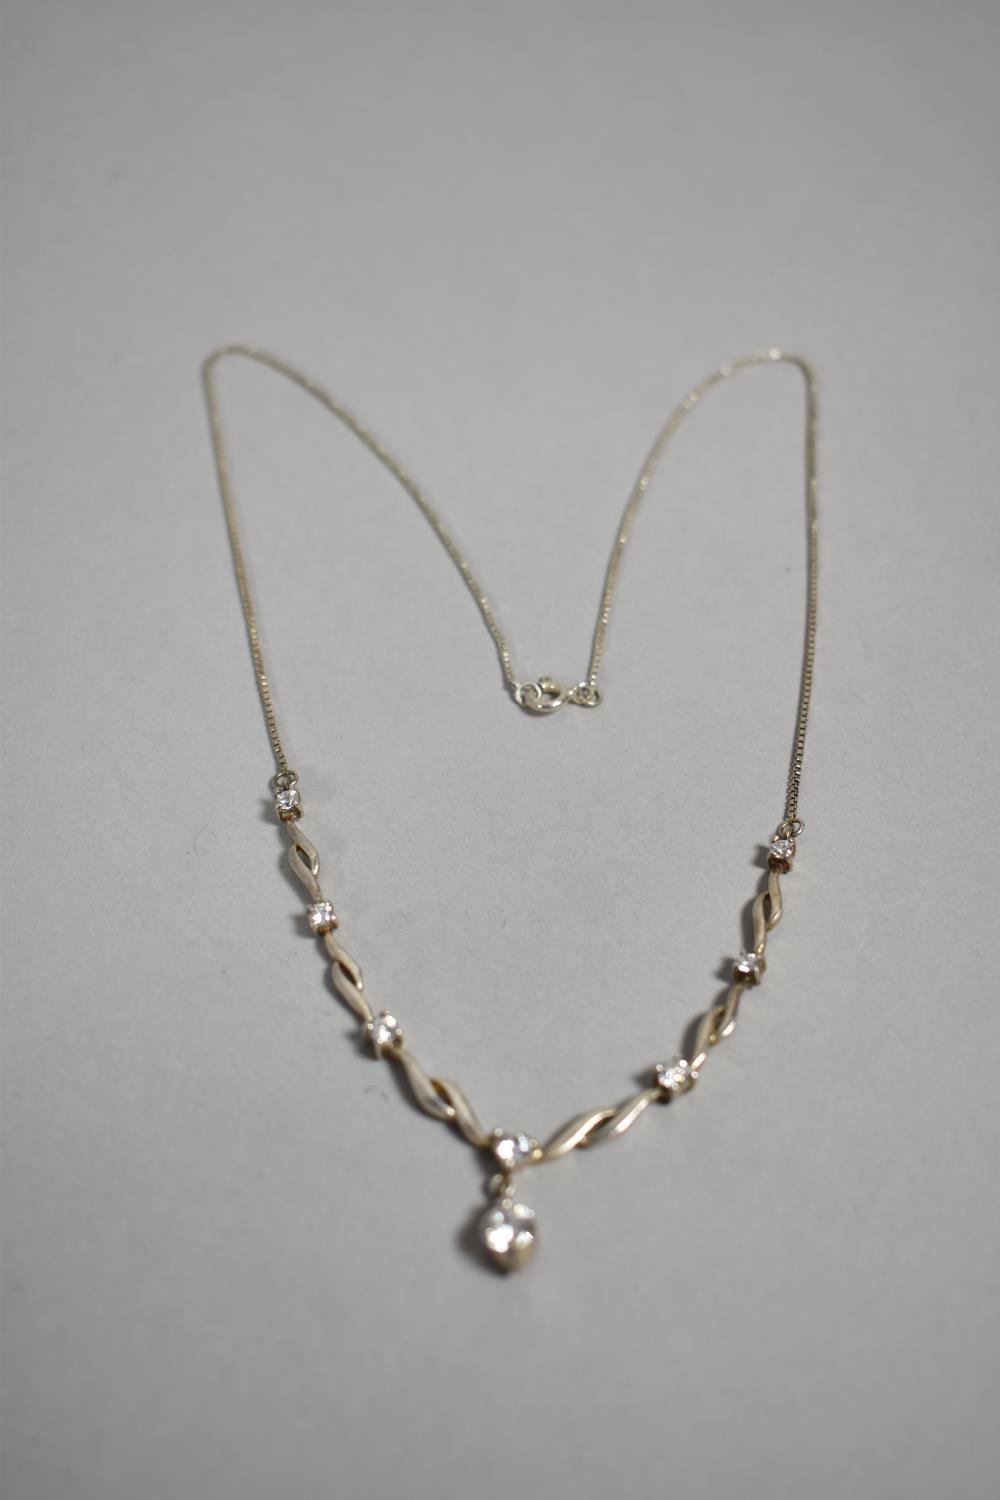 A Jewelled Silver Necklace